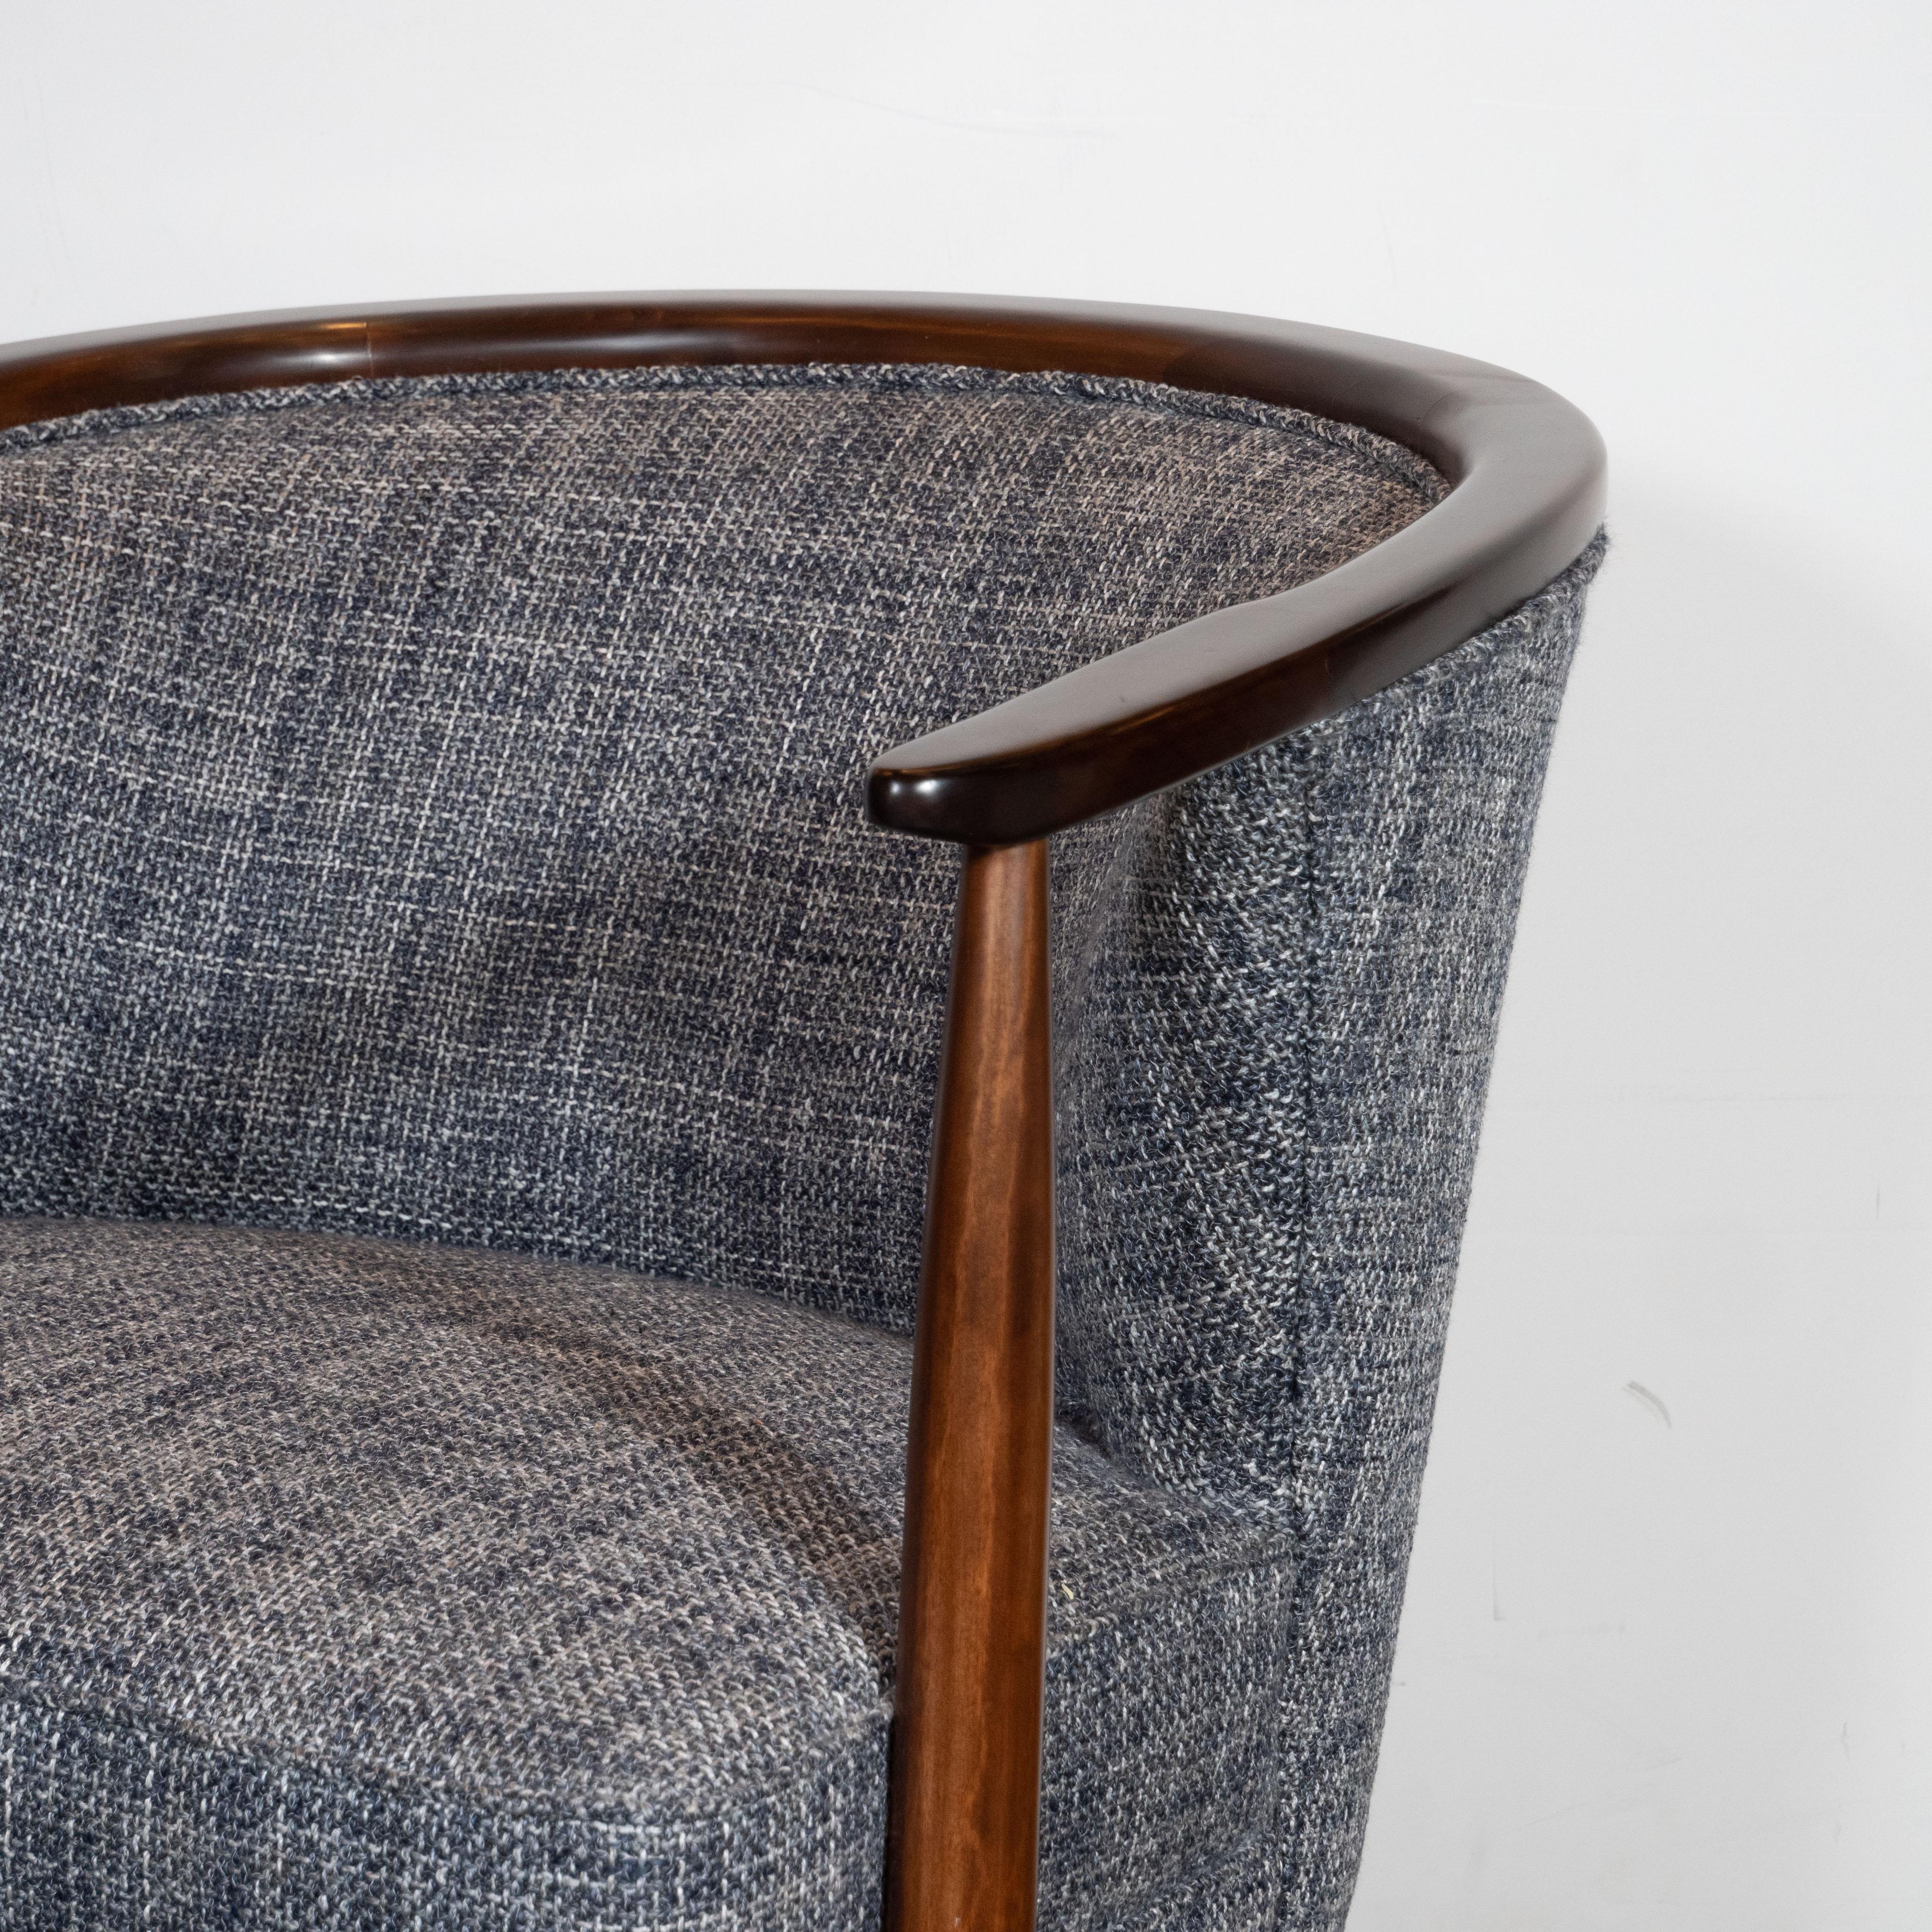 This elegant pair of Mid-Century Modern barrel back chairs were realized in the United States, circa 1950. They offer a dramatically curved back with handrubbed walnut detailing at the top that adjoins the cylindrical walnut arms that taper at each